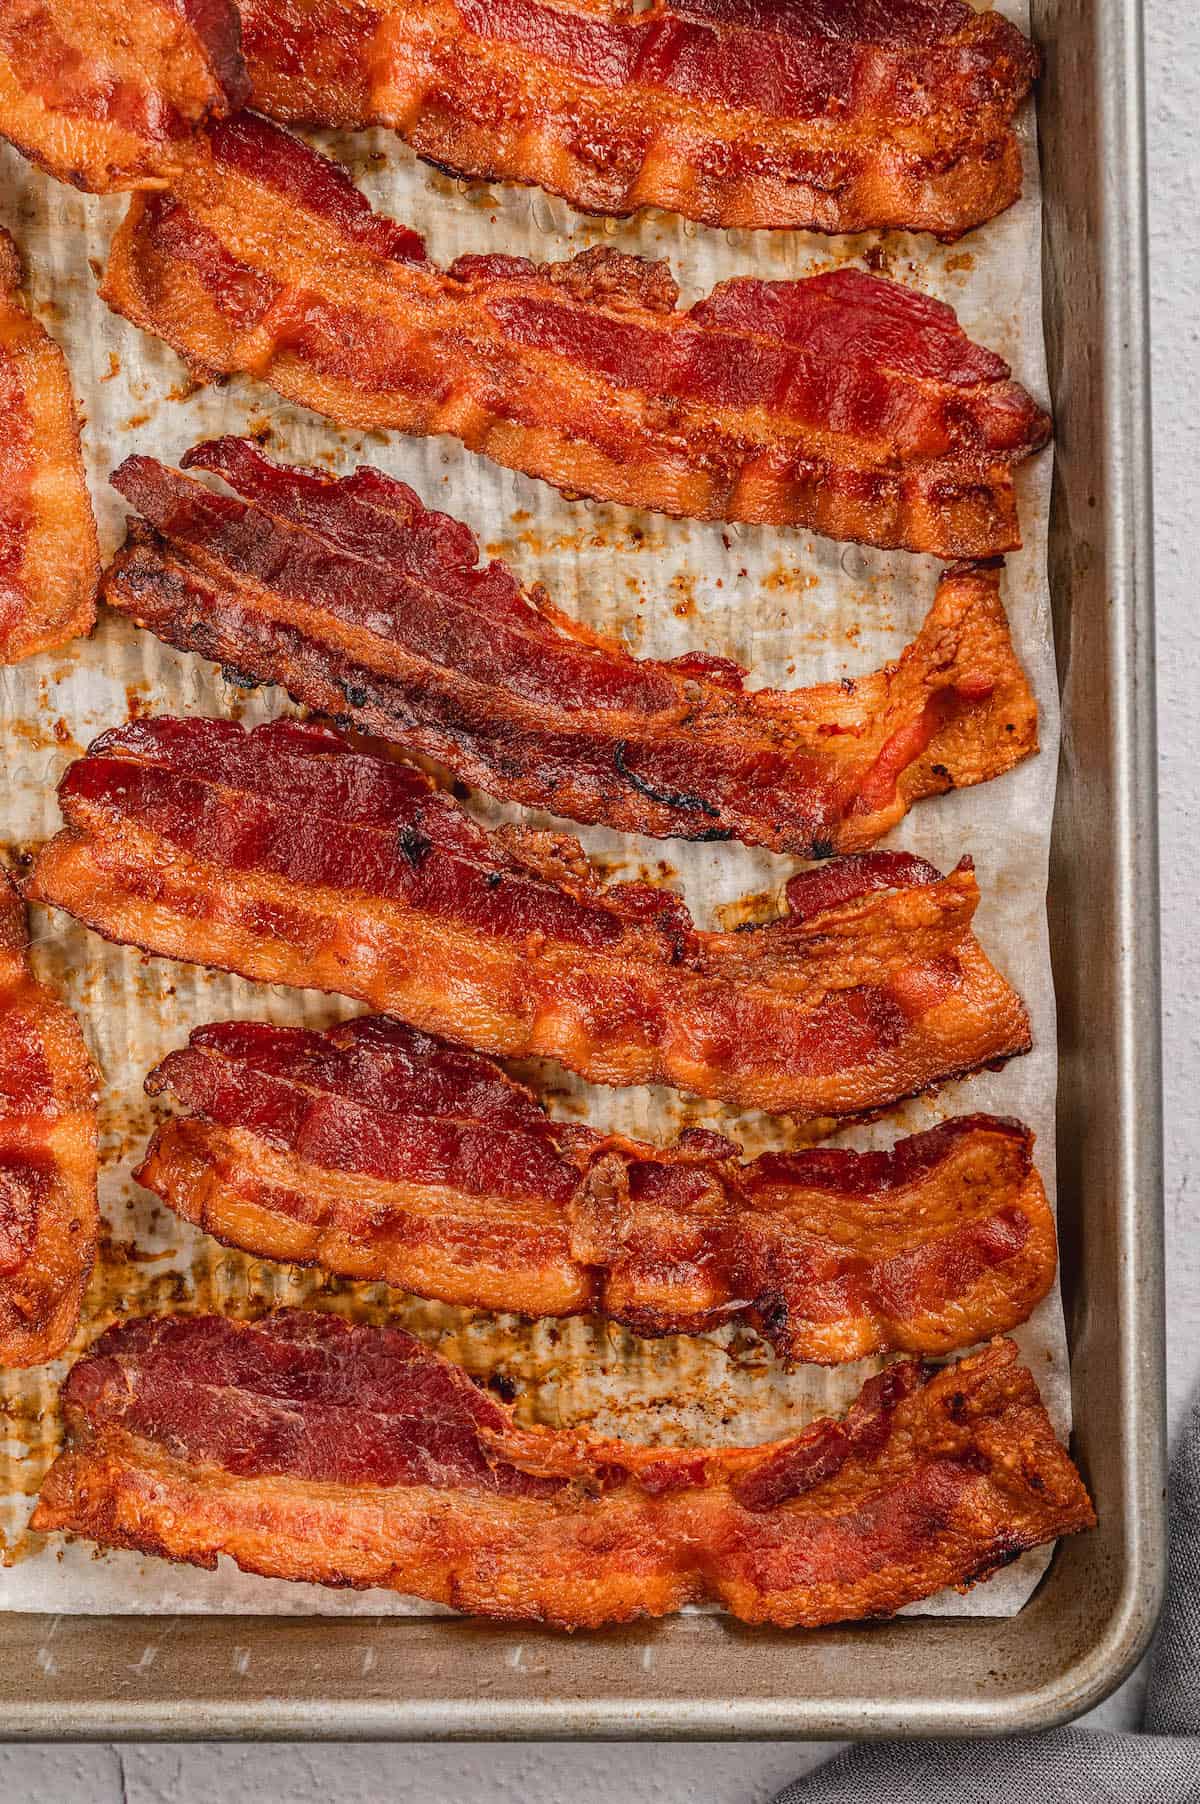 https://foxeslovelemons.com/wp-content/uploads/2023/03/How-To-Cook-Bacon-In-The-Oven-4.jpg